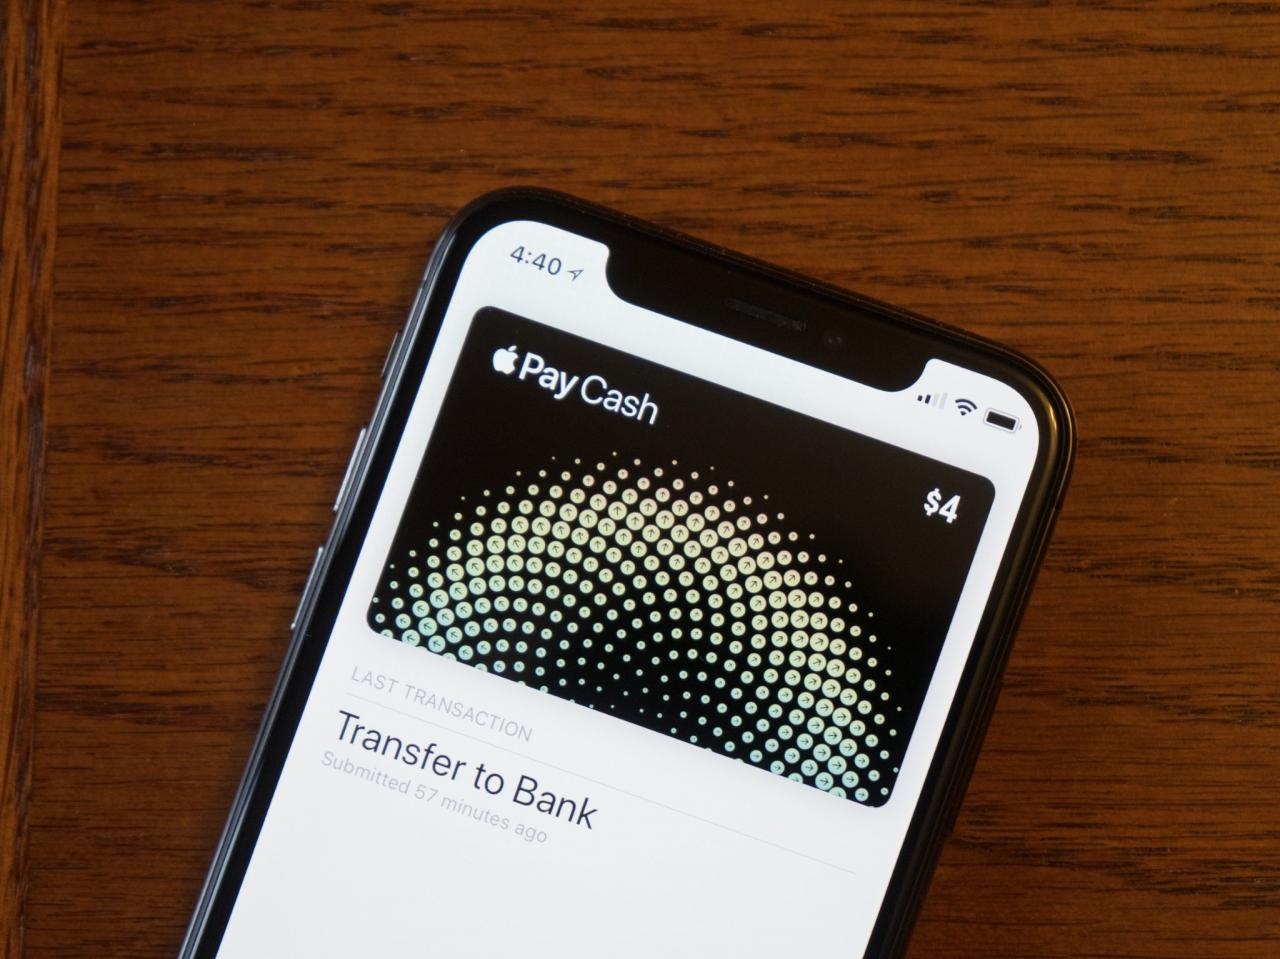 Stop an apple pay payment